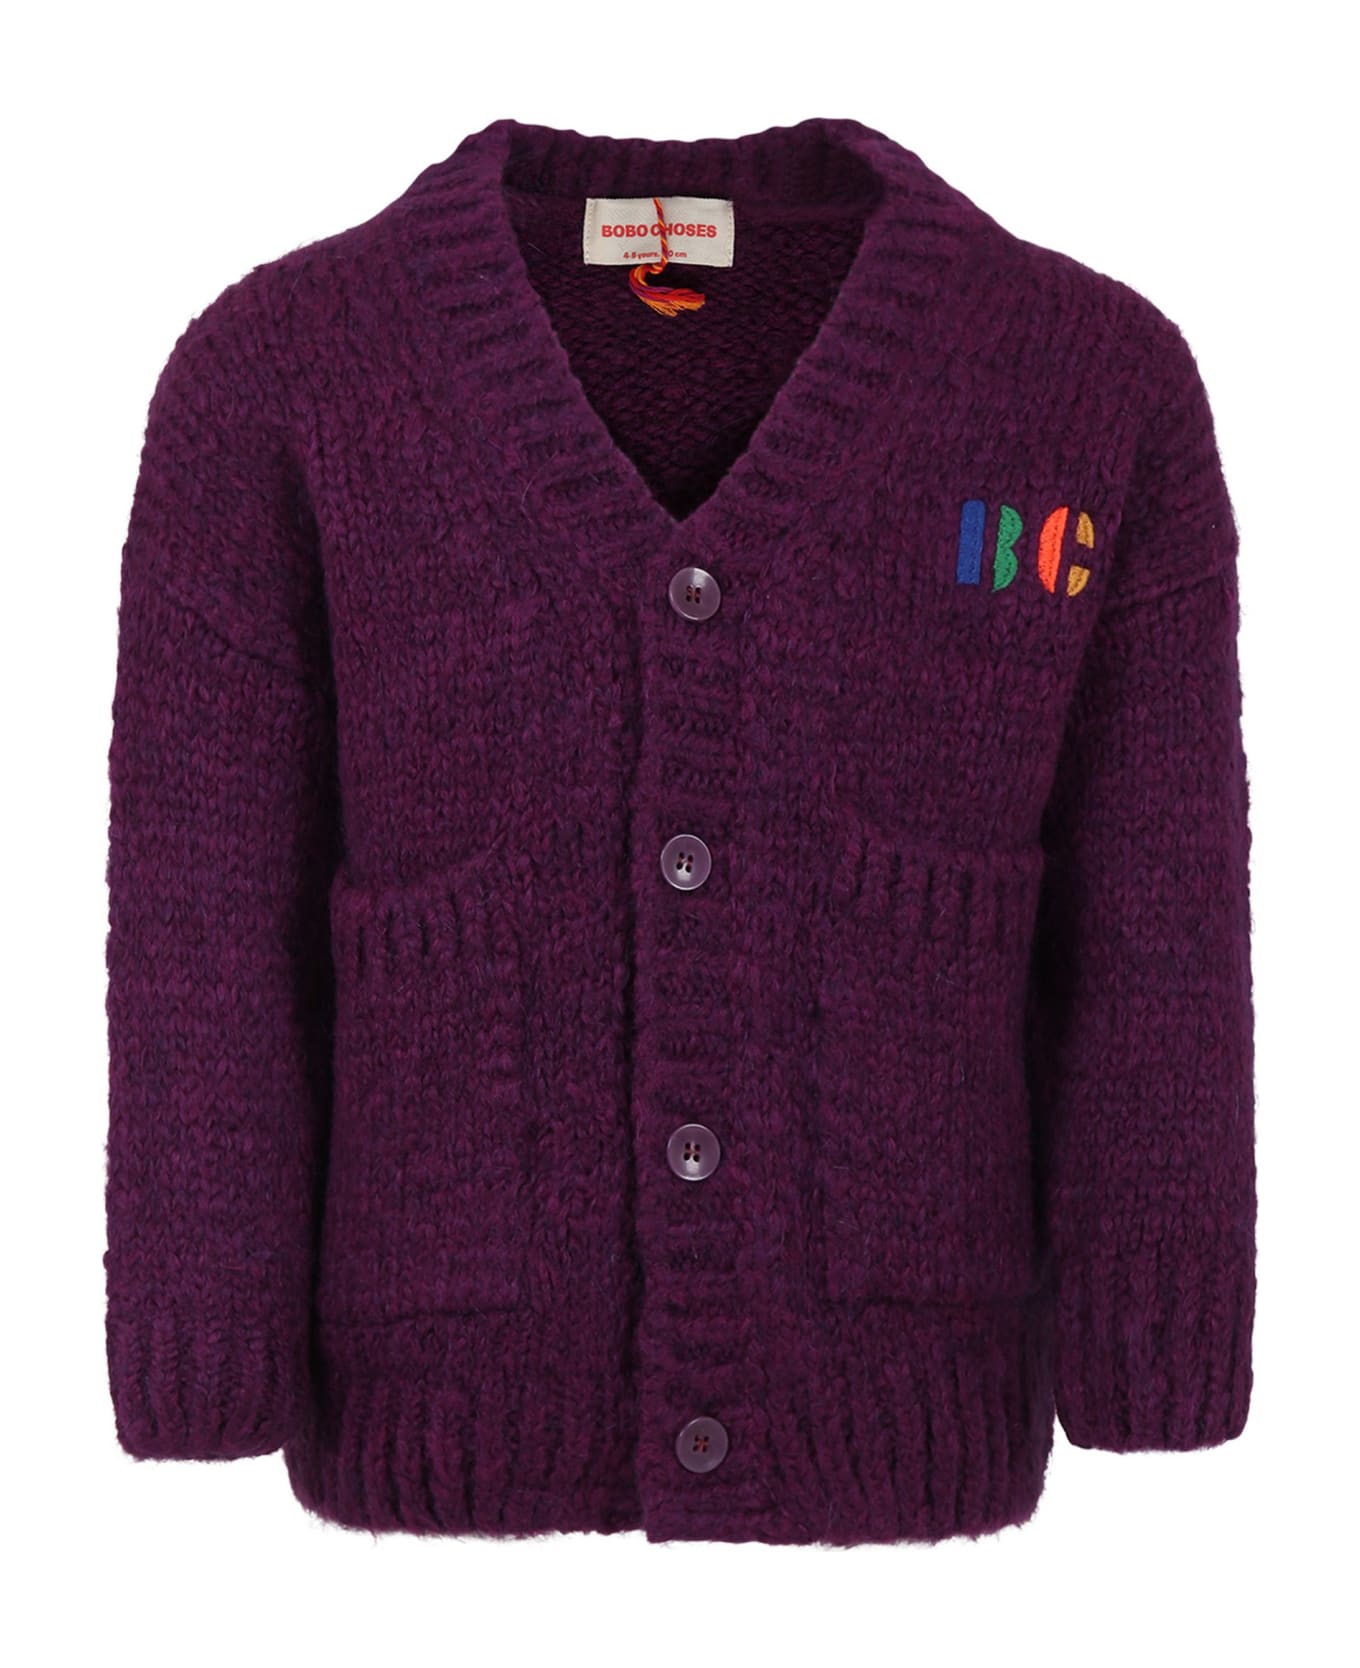 Bobo Choses Purple Cardigan For Girl With Logo - Bordeaux